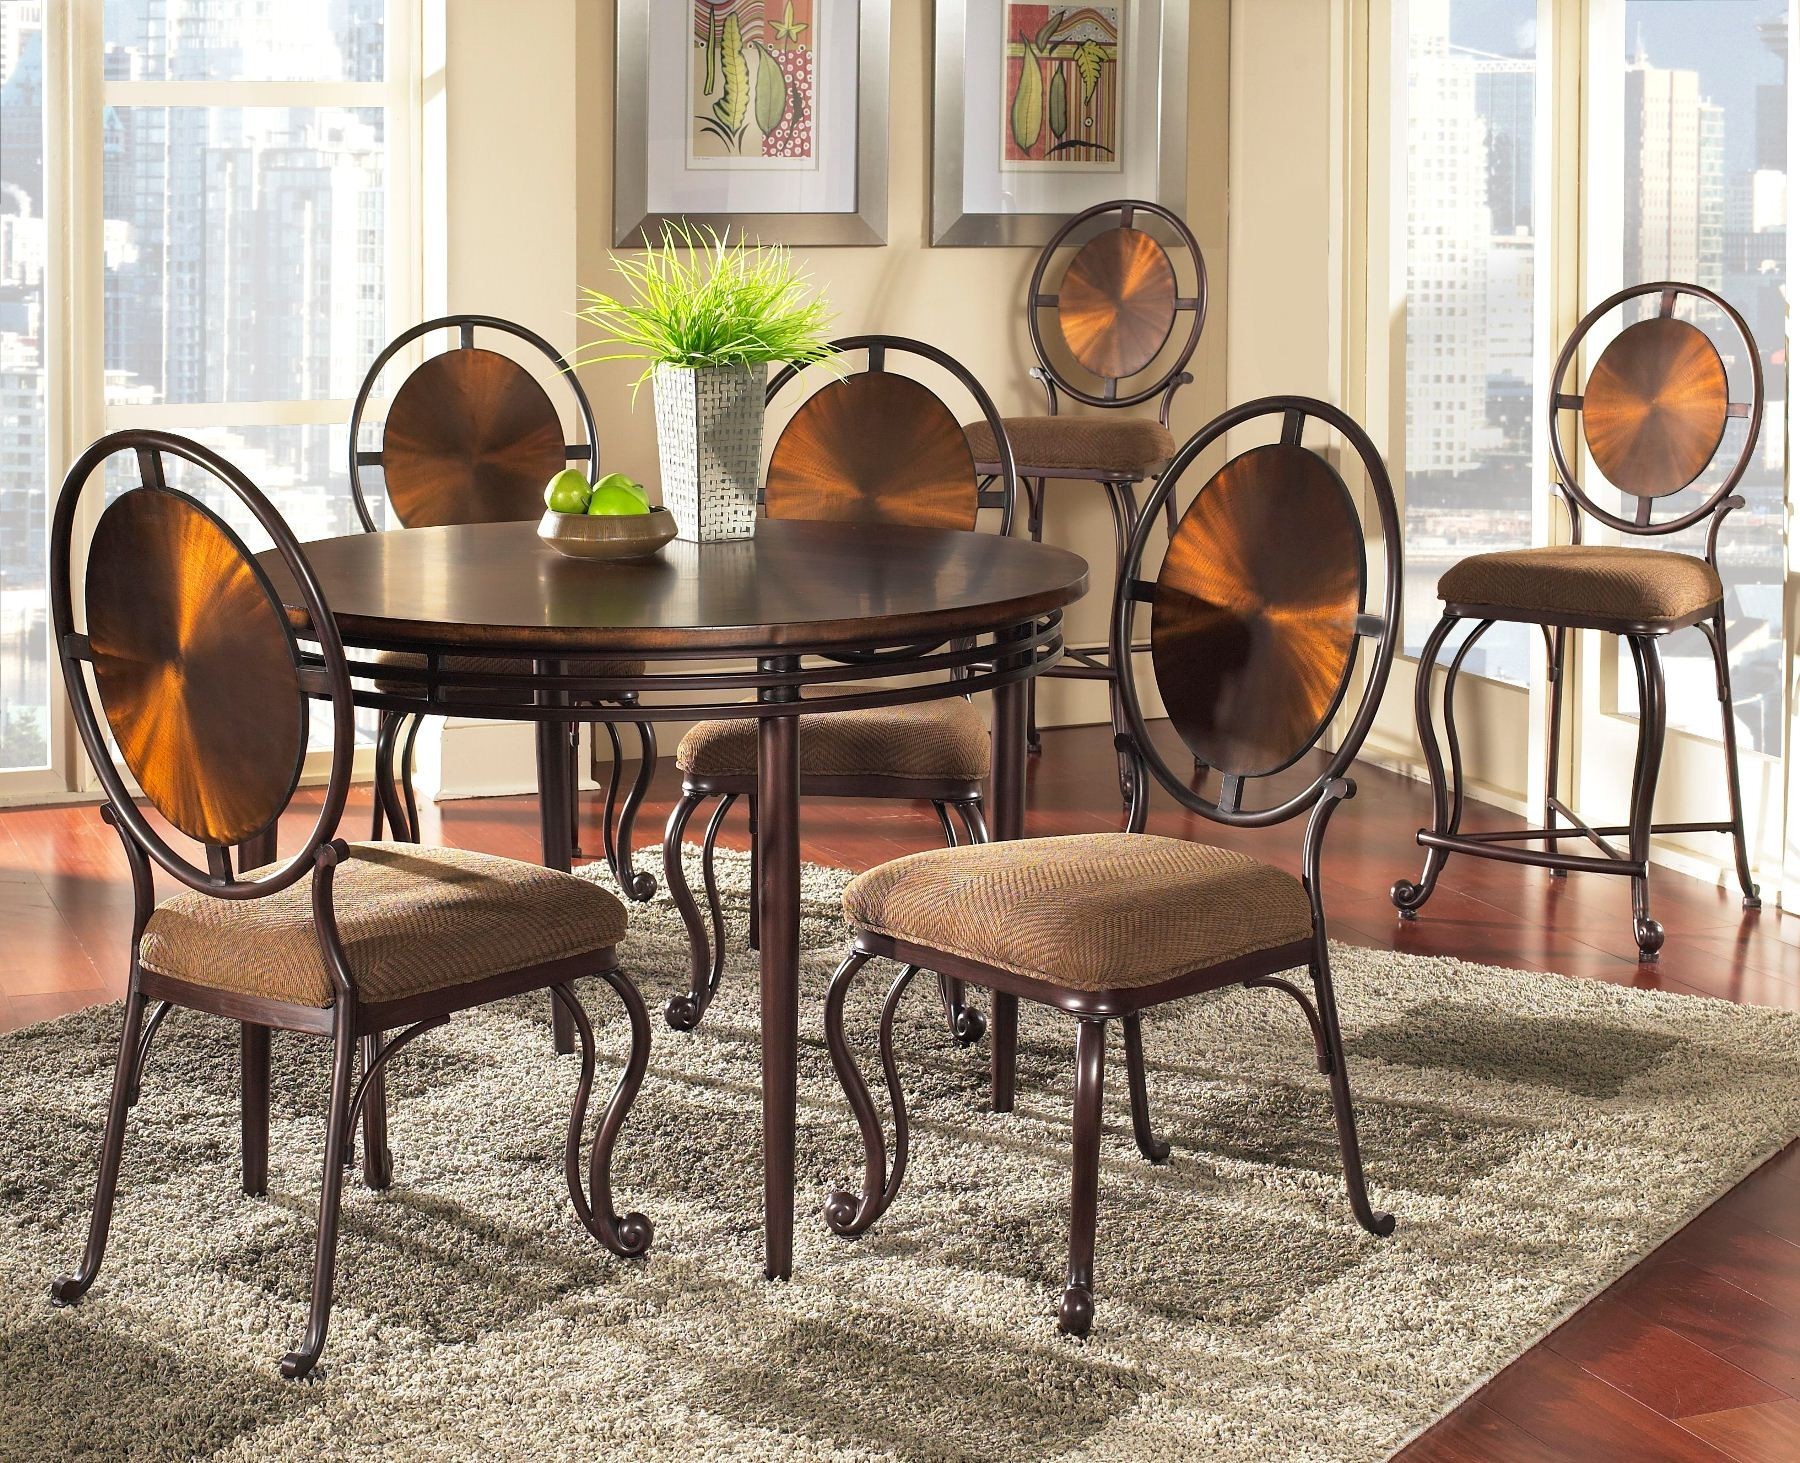 Glass dining room sets